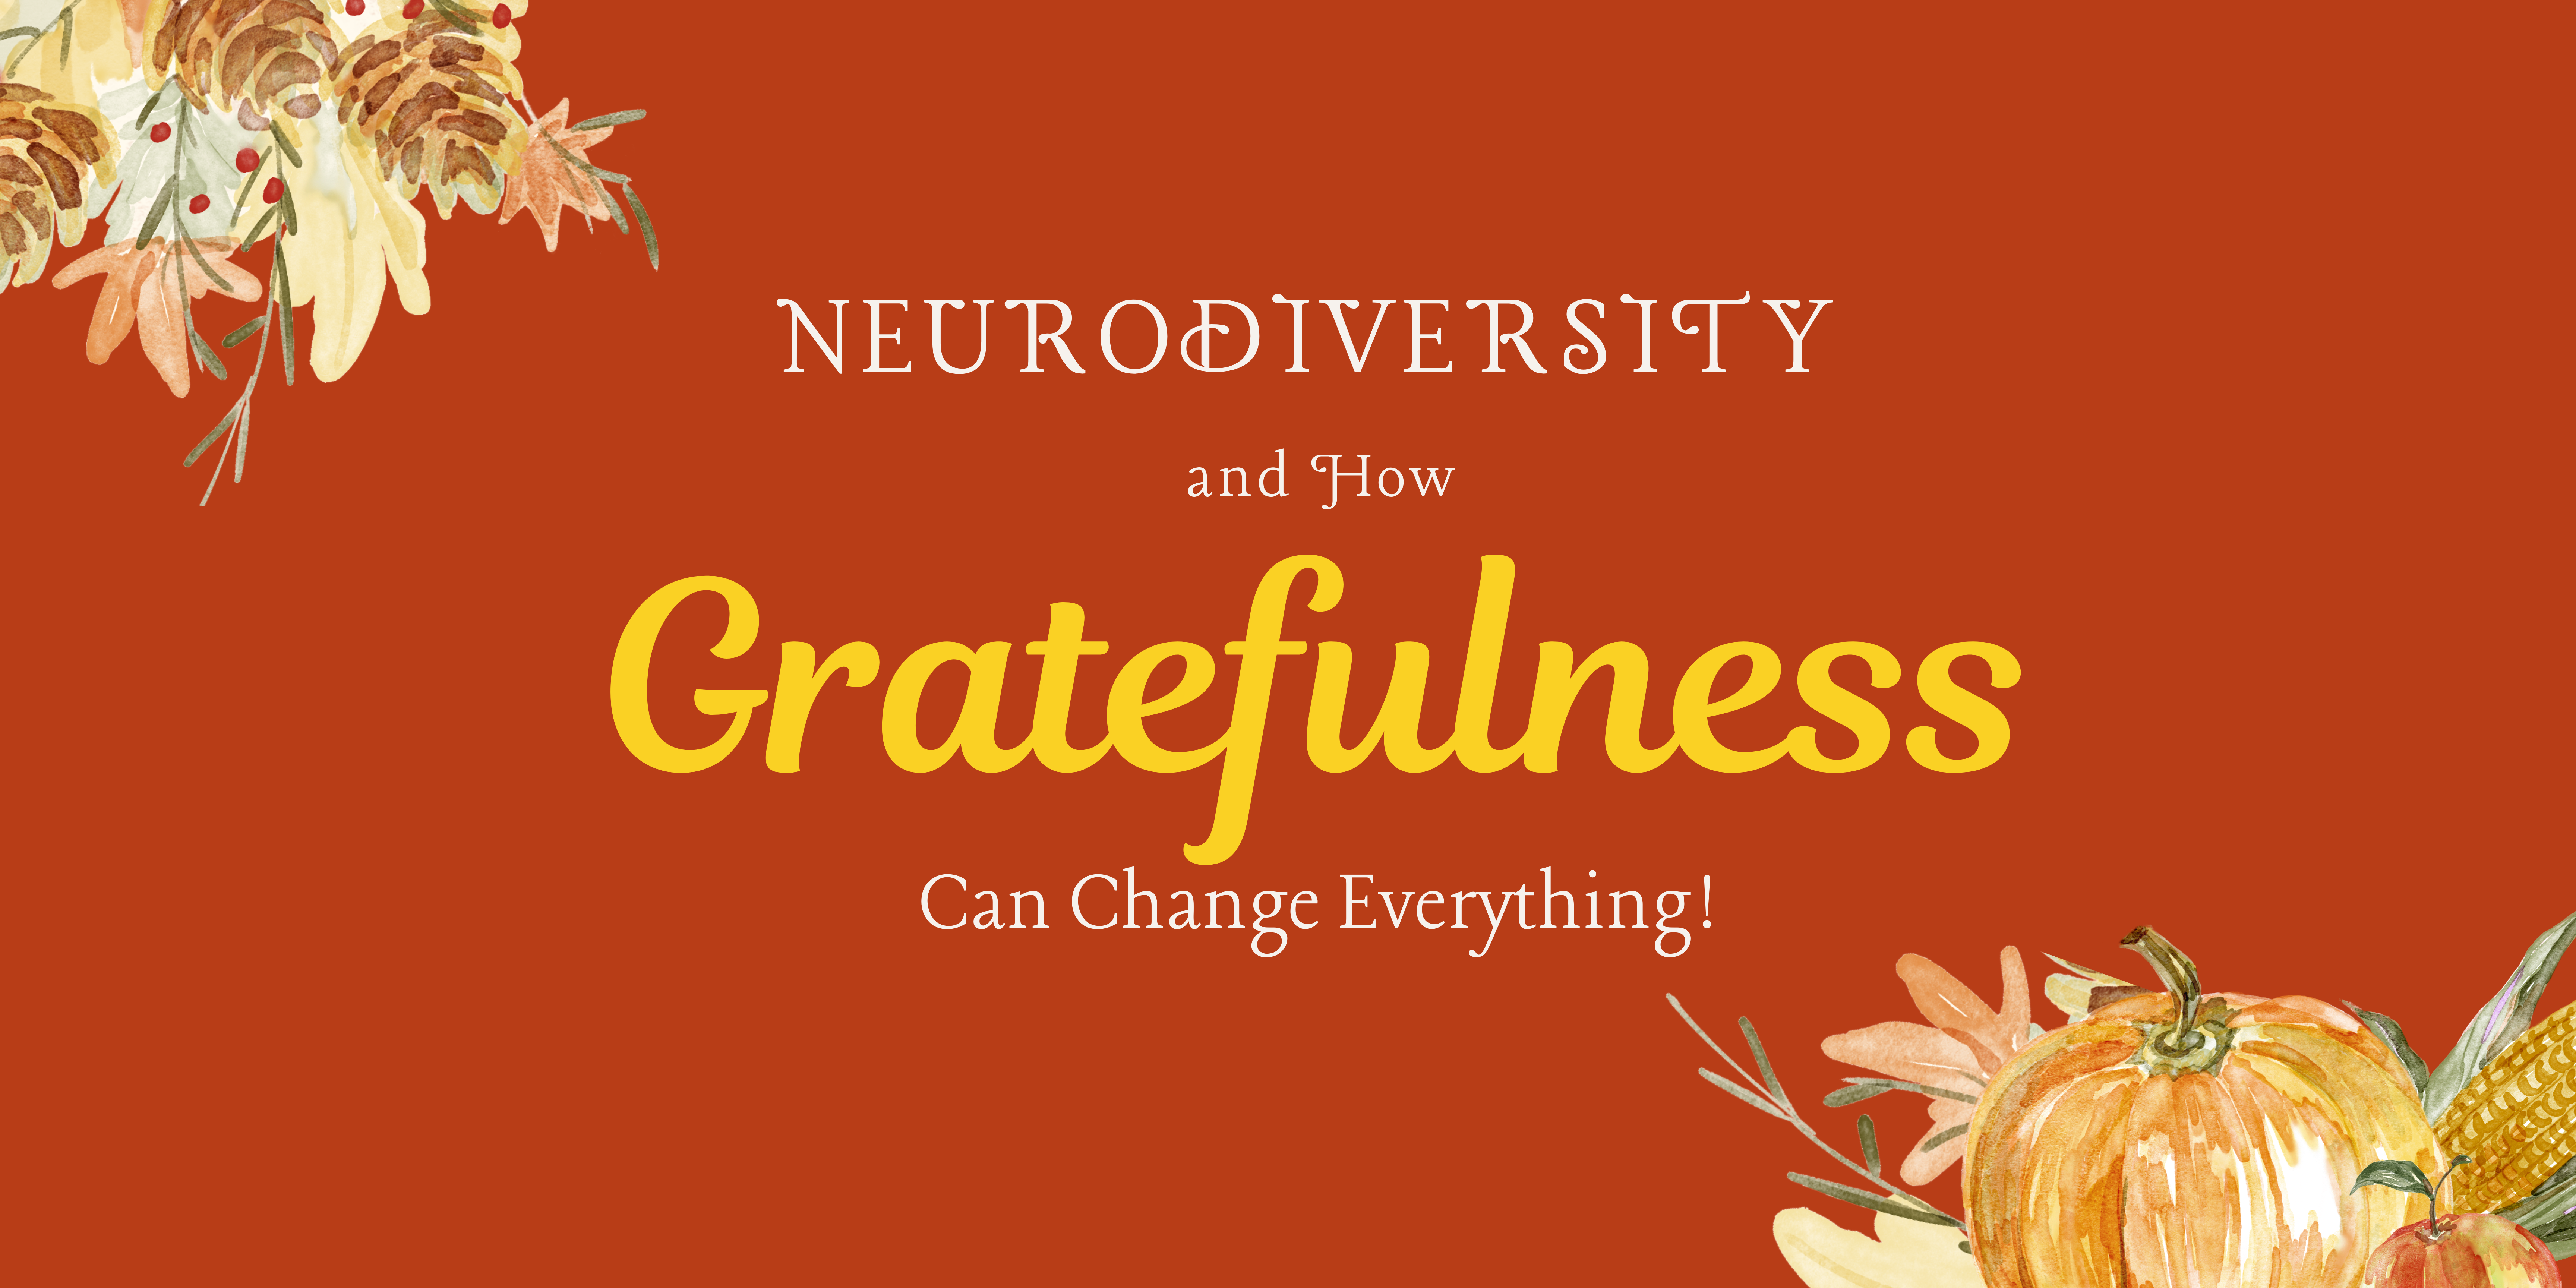 Neurodiversity and How Gratefulness Can Change Everything!